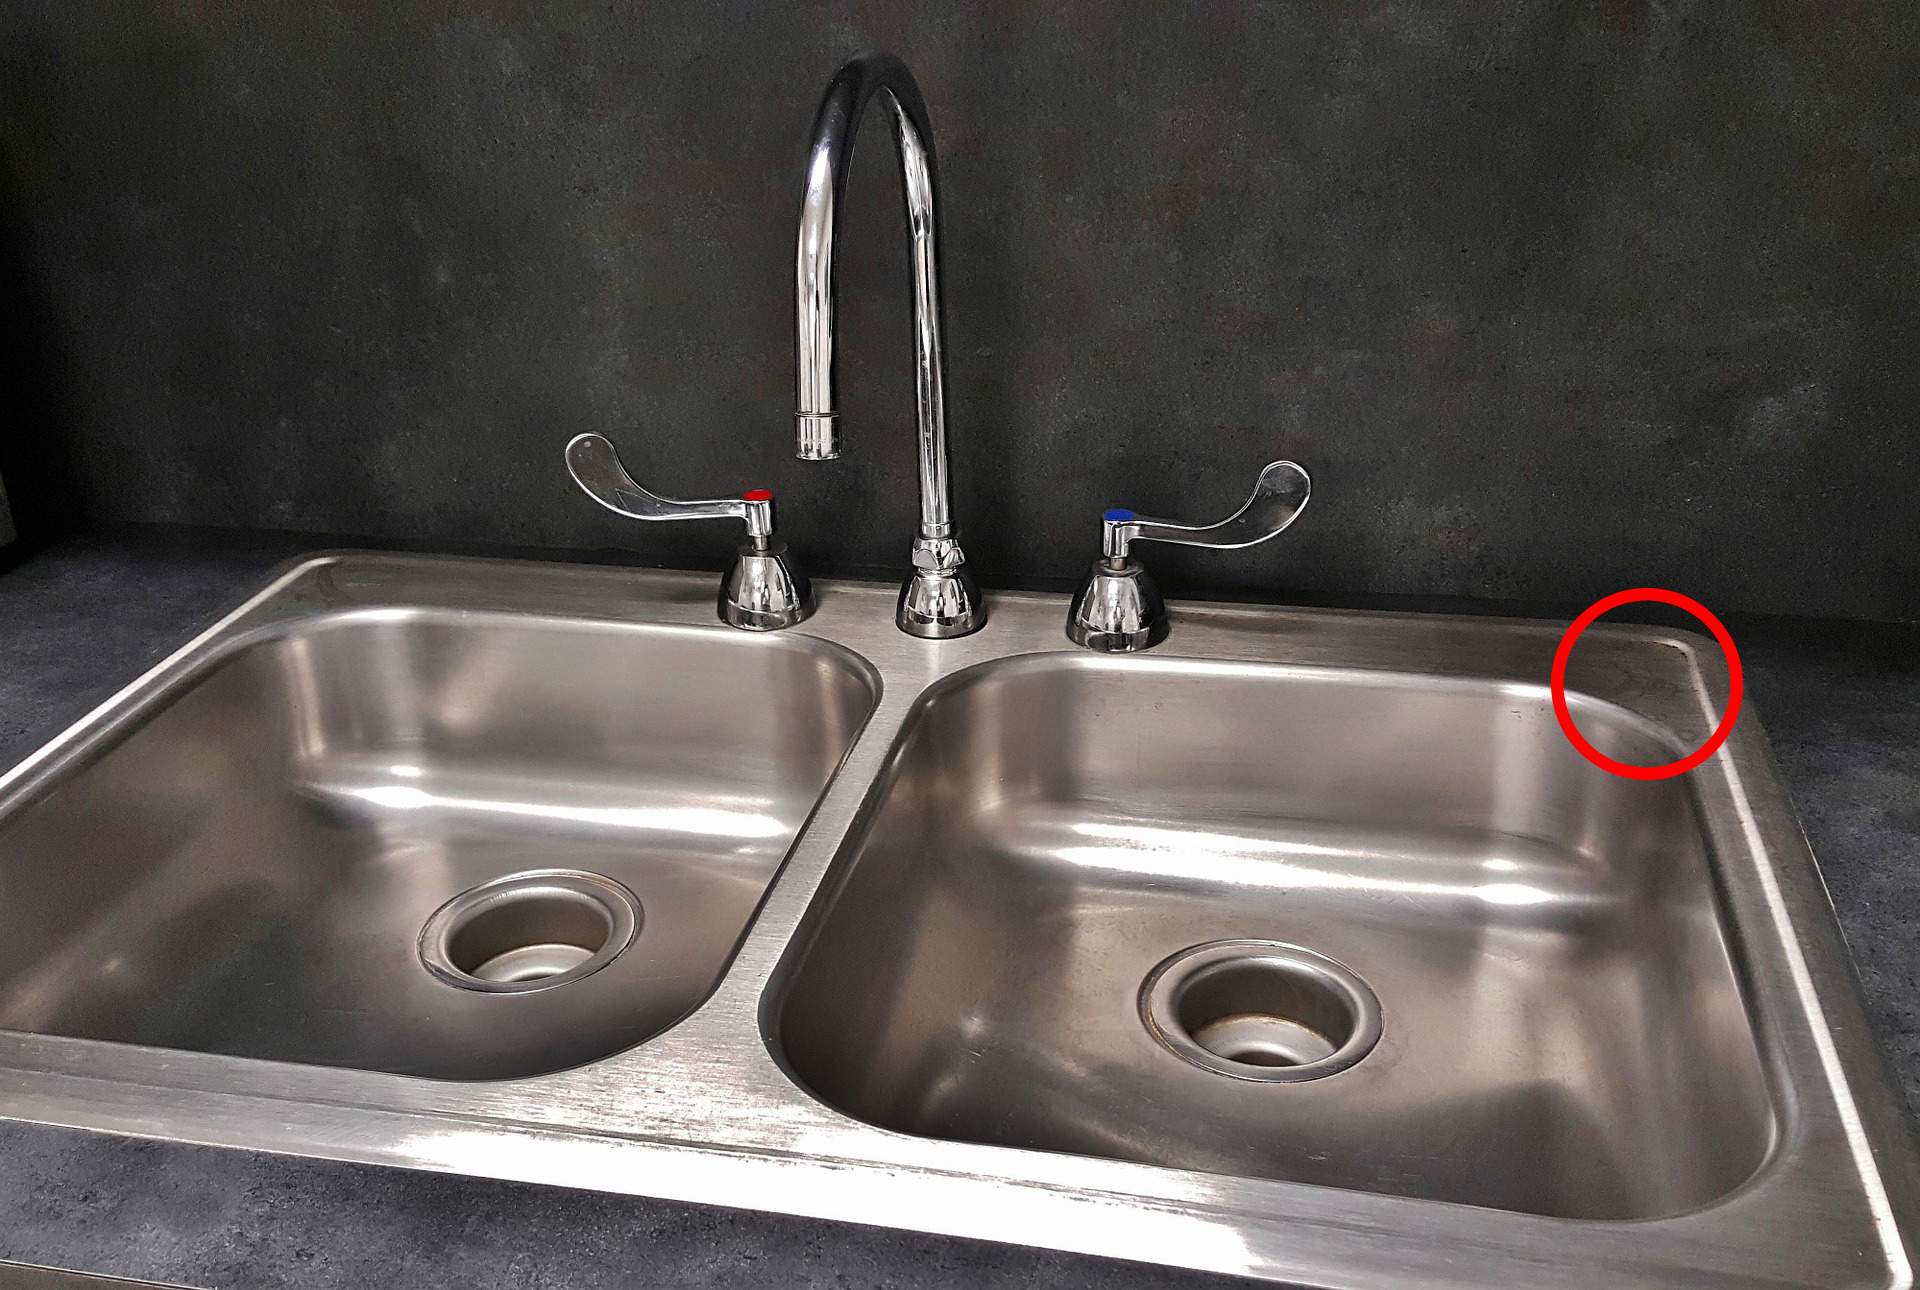 Sinks with exposed sink